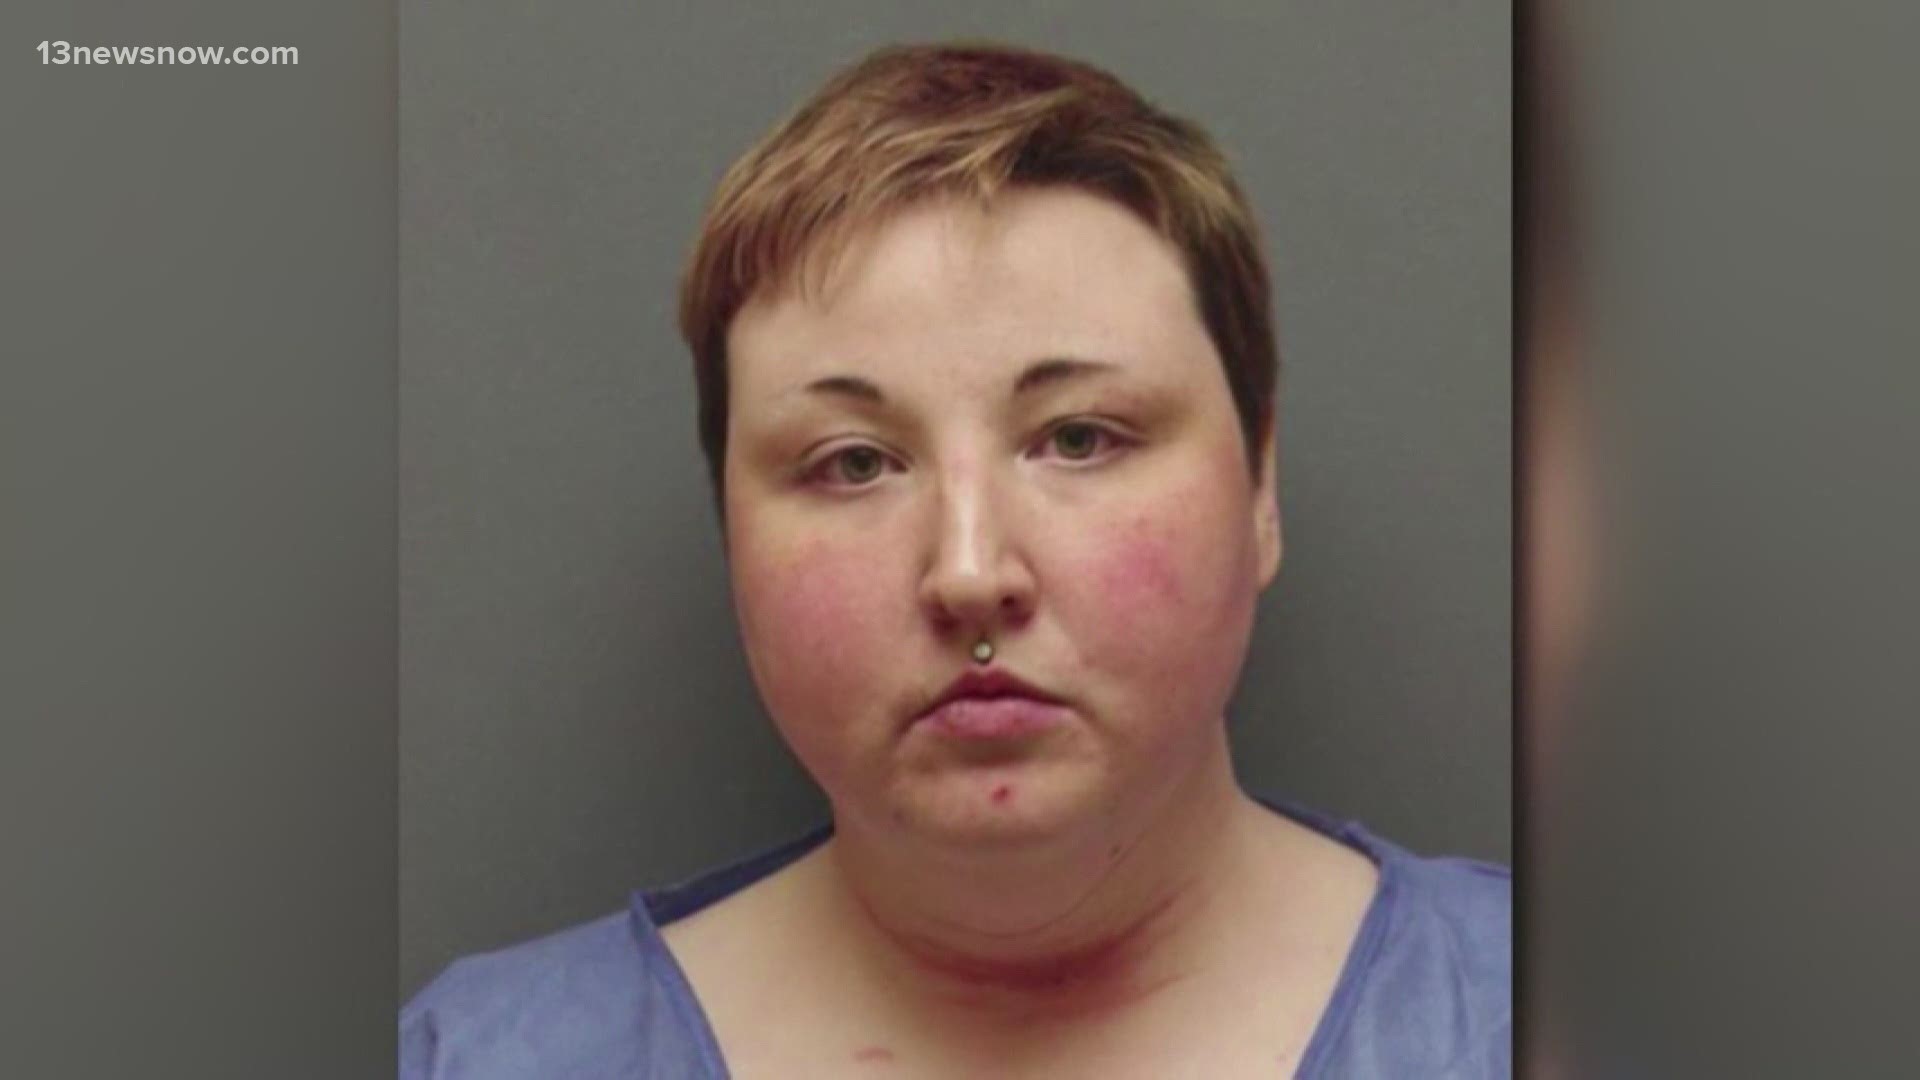 According to the affidavit, Sarah Ganoe's infant baby was stabbed multiple times in the chest and abdomen, and her 8-year-old had 50+ stab wounds.